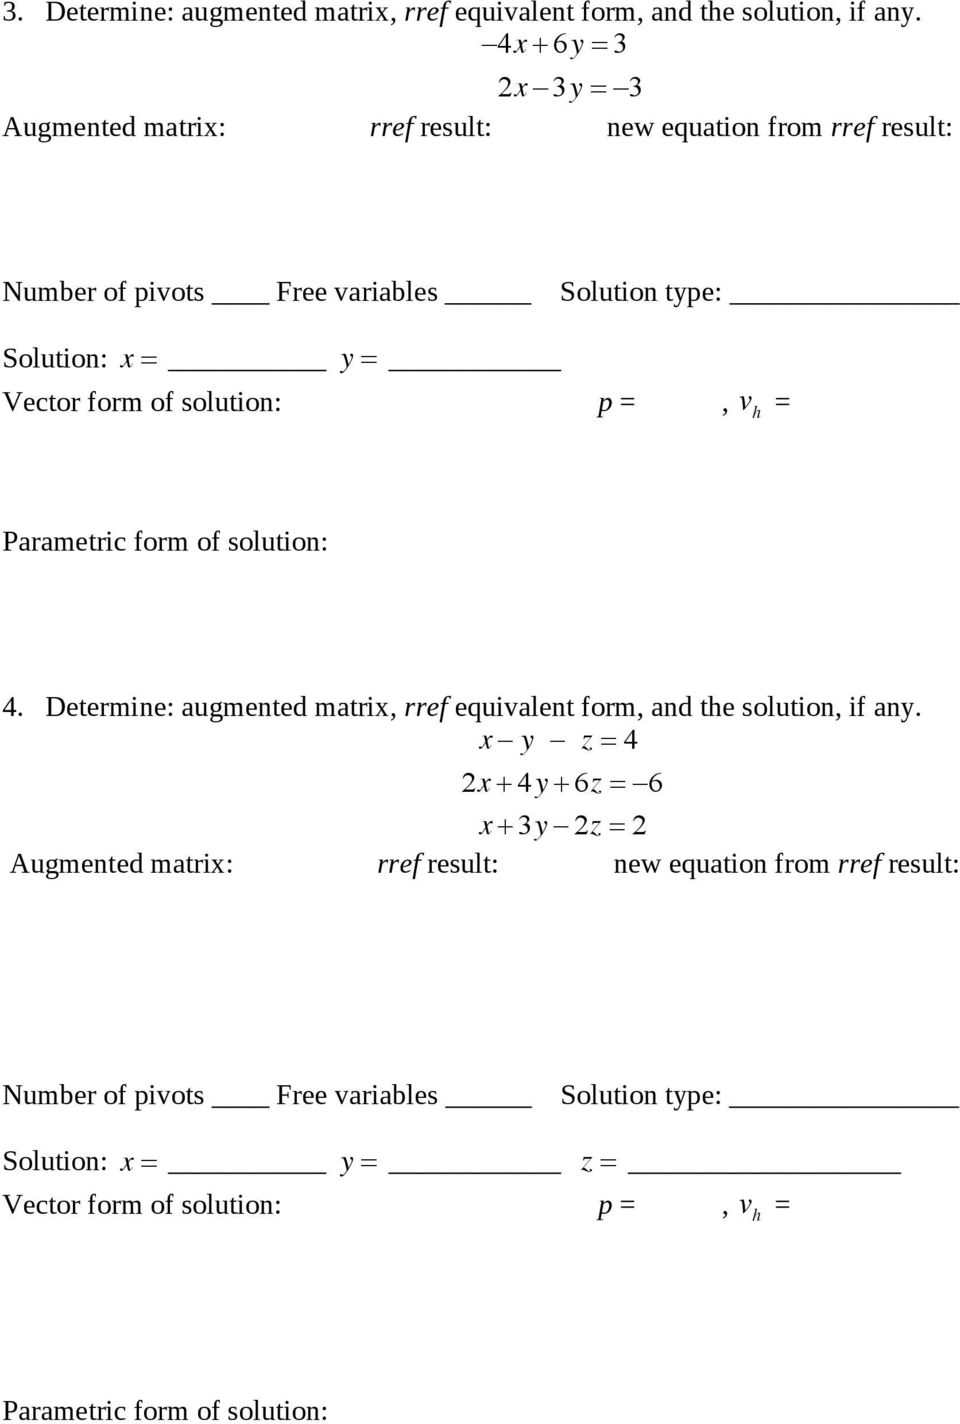 Determine: augmented matri, rref equivalent form, and the solution, if